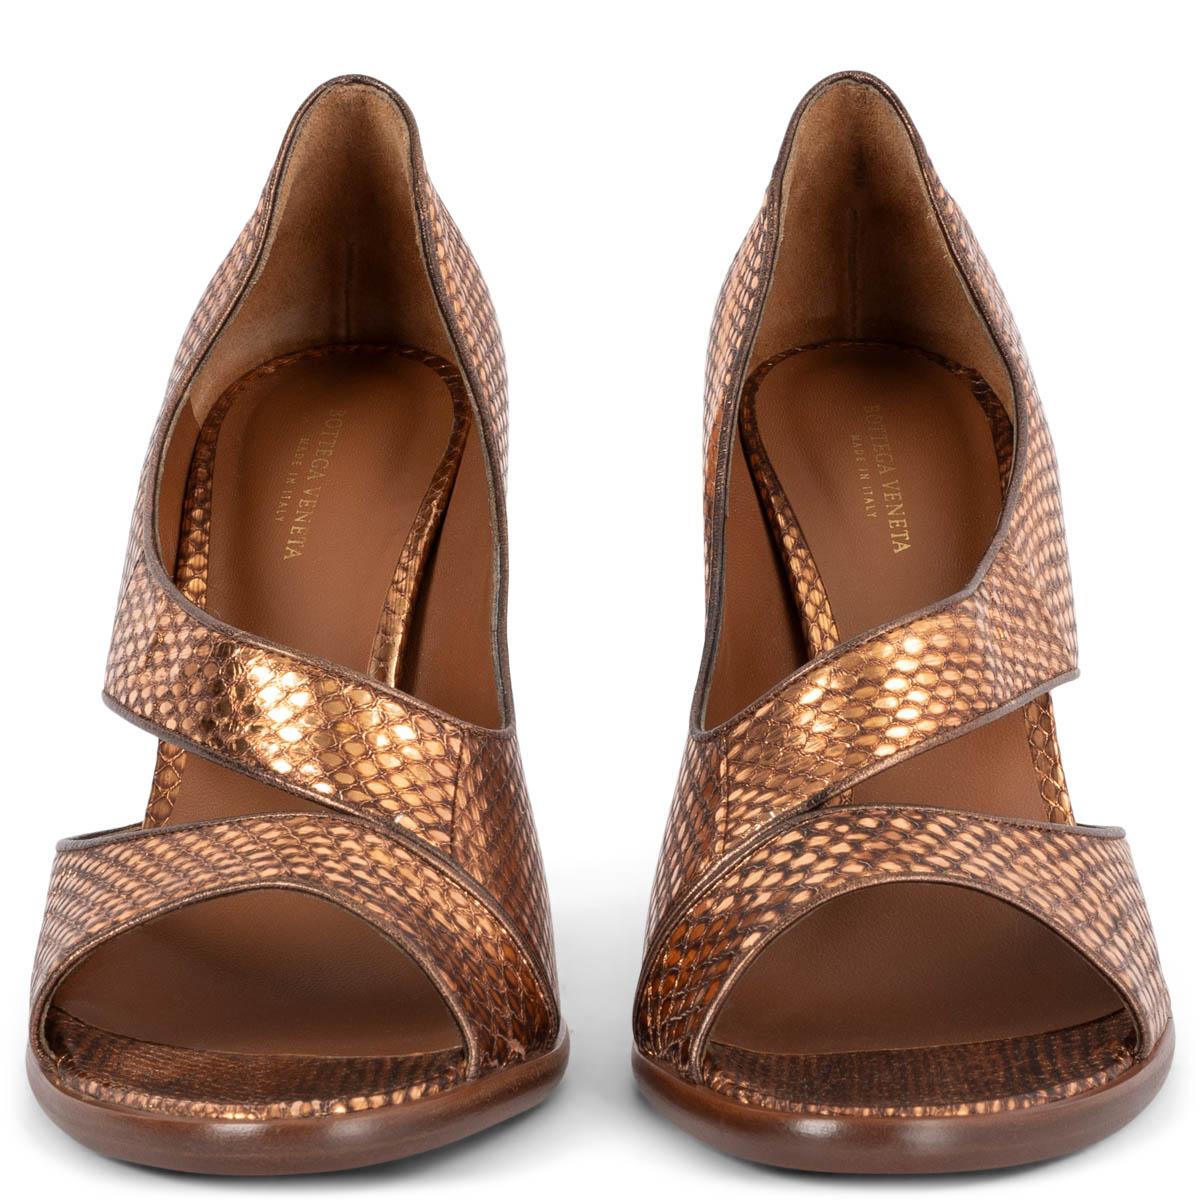 100% authentic Bottega Veneta sandals in copper snake effect leather with a brown Intrecciato heel. Brand new. Come with dust bag. 

Measurements
Imprinted Size	38.5
Shoe Size	38.5
Inside Sole	25.5cm (9.9in)
Width	8cm (3.1in)
Heel	10cm (3.9in)

All